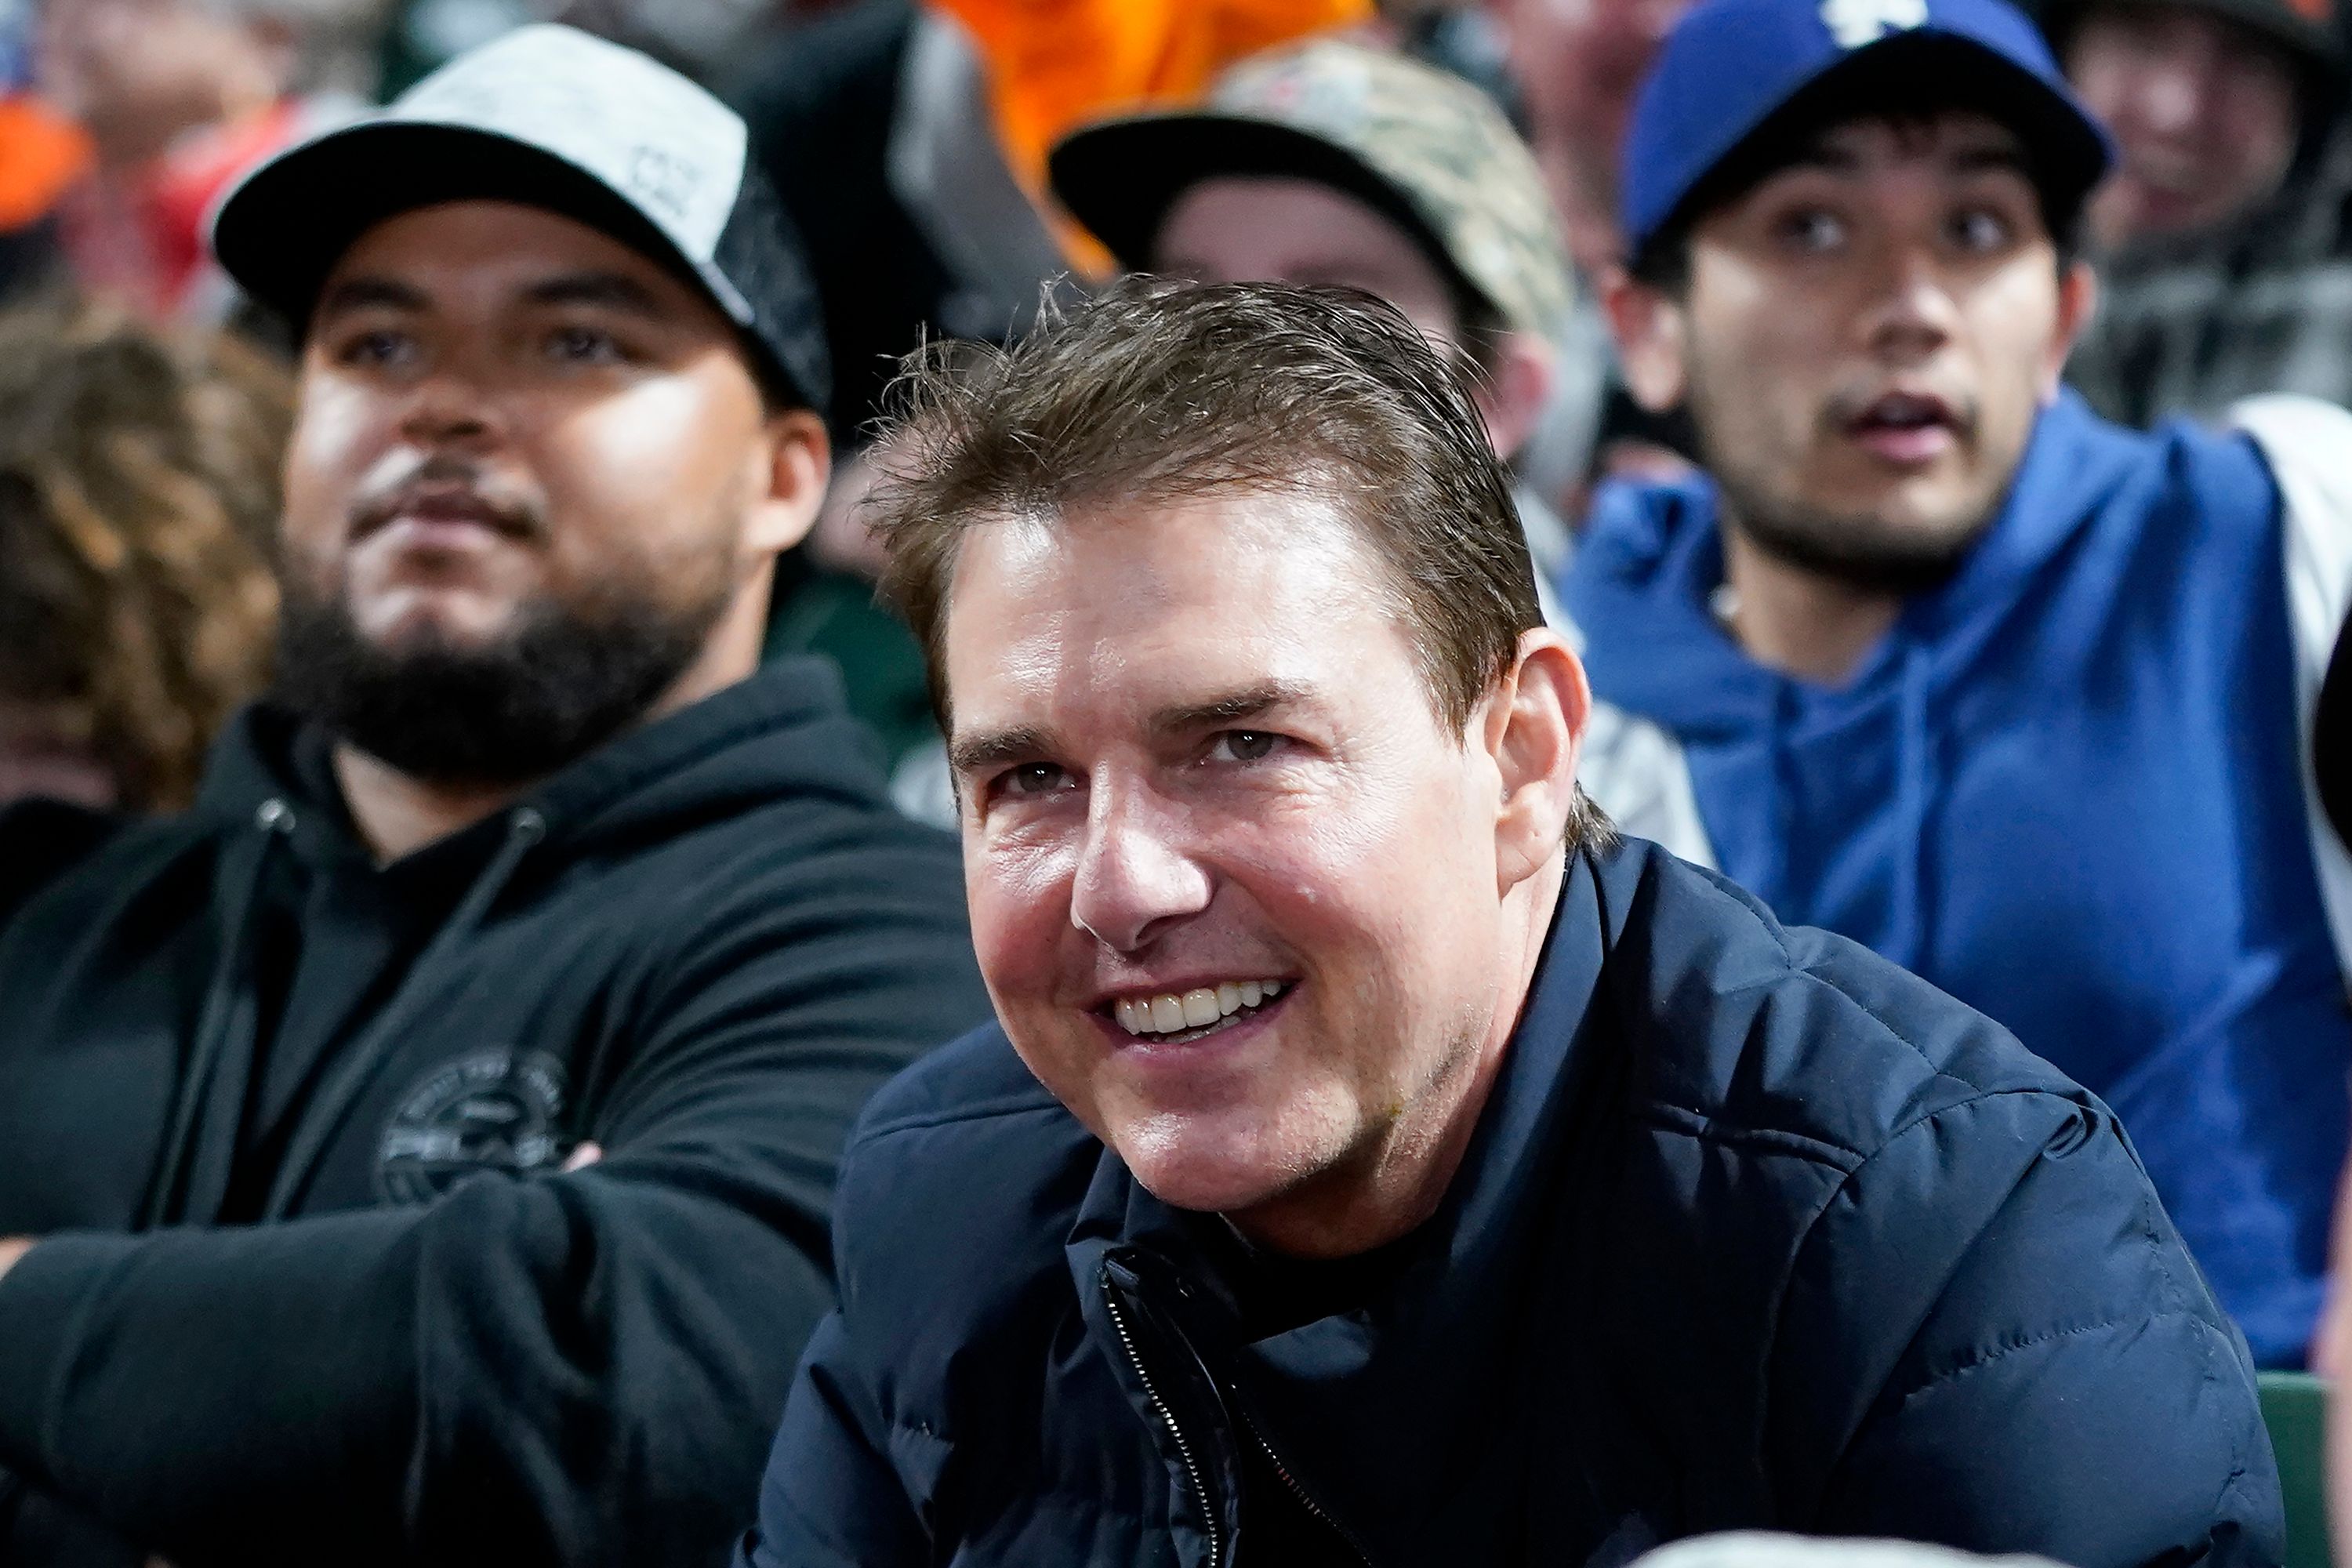 <p>In October 2021, Tom Cruise made headlines when he was photographed with son Connor at a National League Division Series baseball game in San Francisco with a fuller-looking face than usual, <a href="https://www.wonderwall.com/news/twitter-has-some-thoughts-about-tom-cruises-face-508142.article">sparking widespread speculation on social media</a> about whether he may have had facial fillers, gained weight or done something else that temporarily altered his looks. </p>